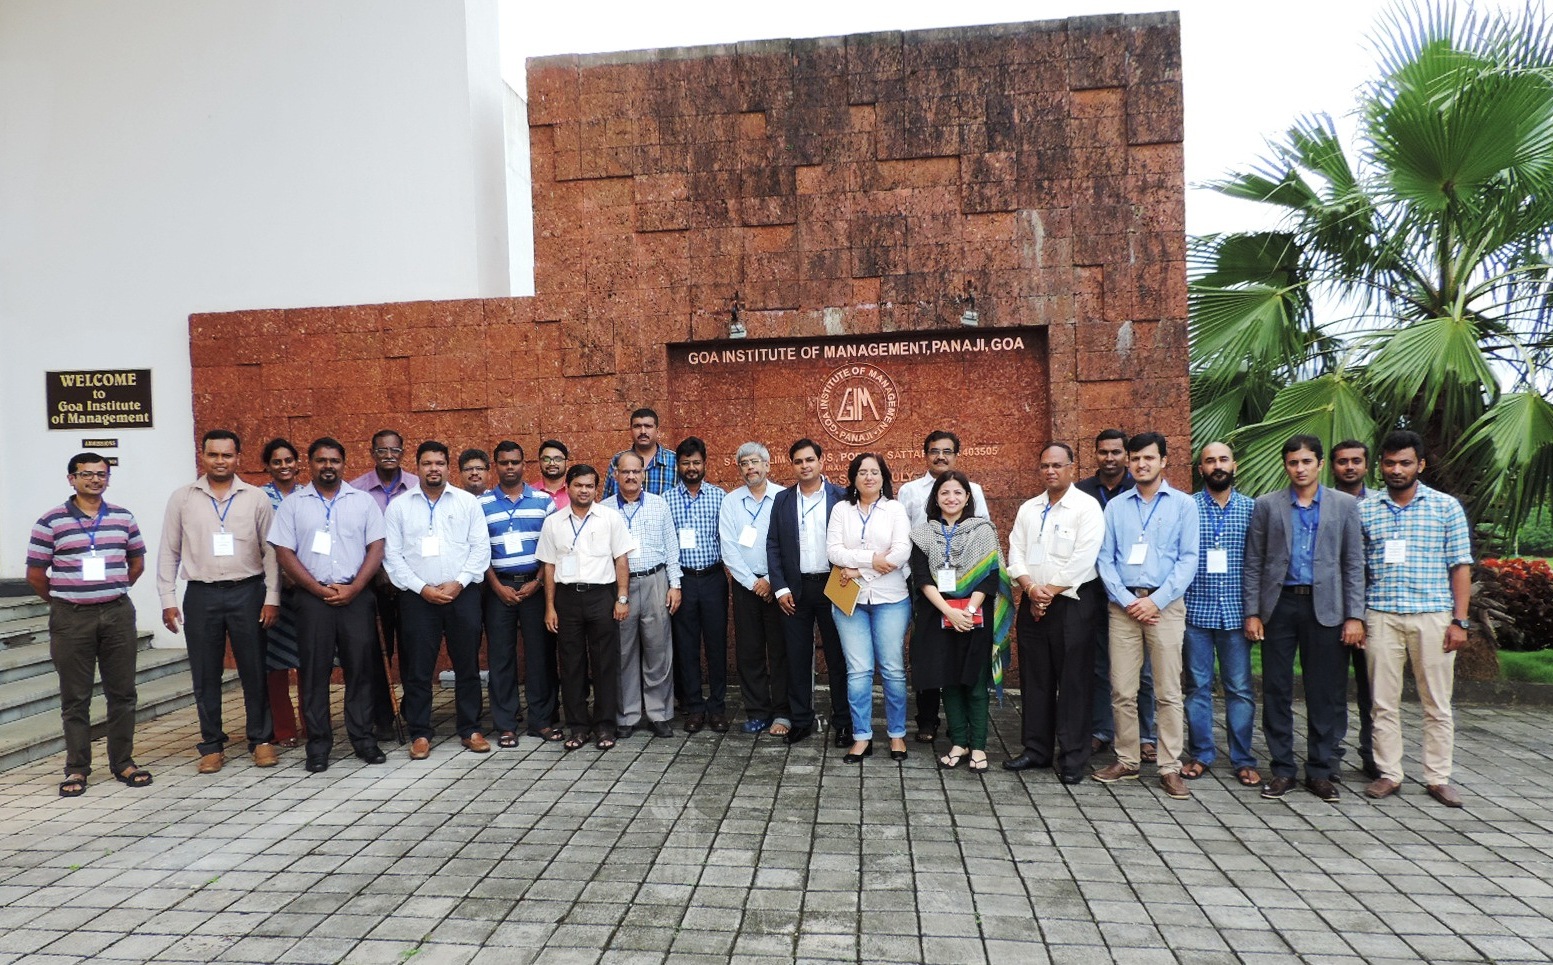 Picture - Prof. Nitin Upadhyay, Chairperson and Head, Centre for Innovation, GIM along with other faculty members and entrepreneurs from Goa who participated in inDialogue hosted by Goa